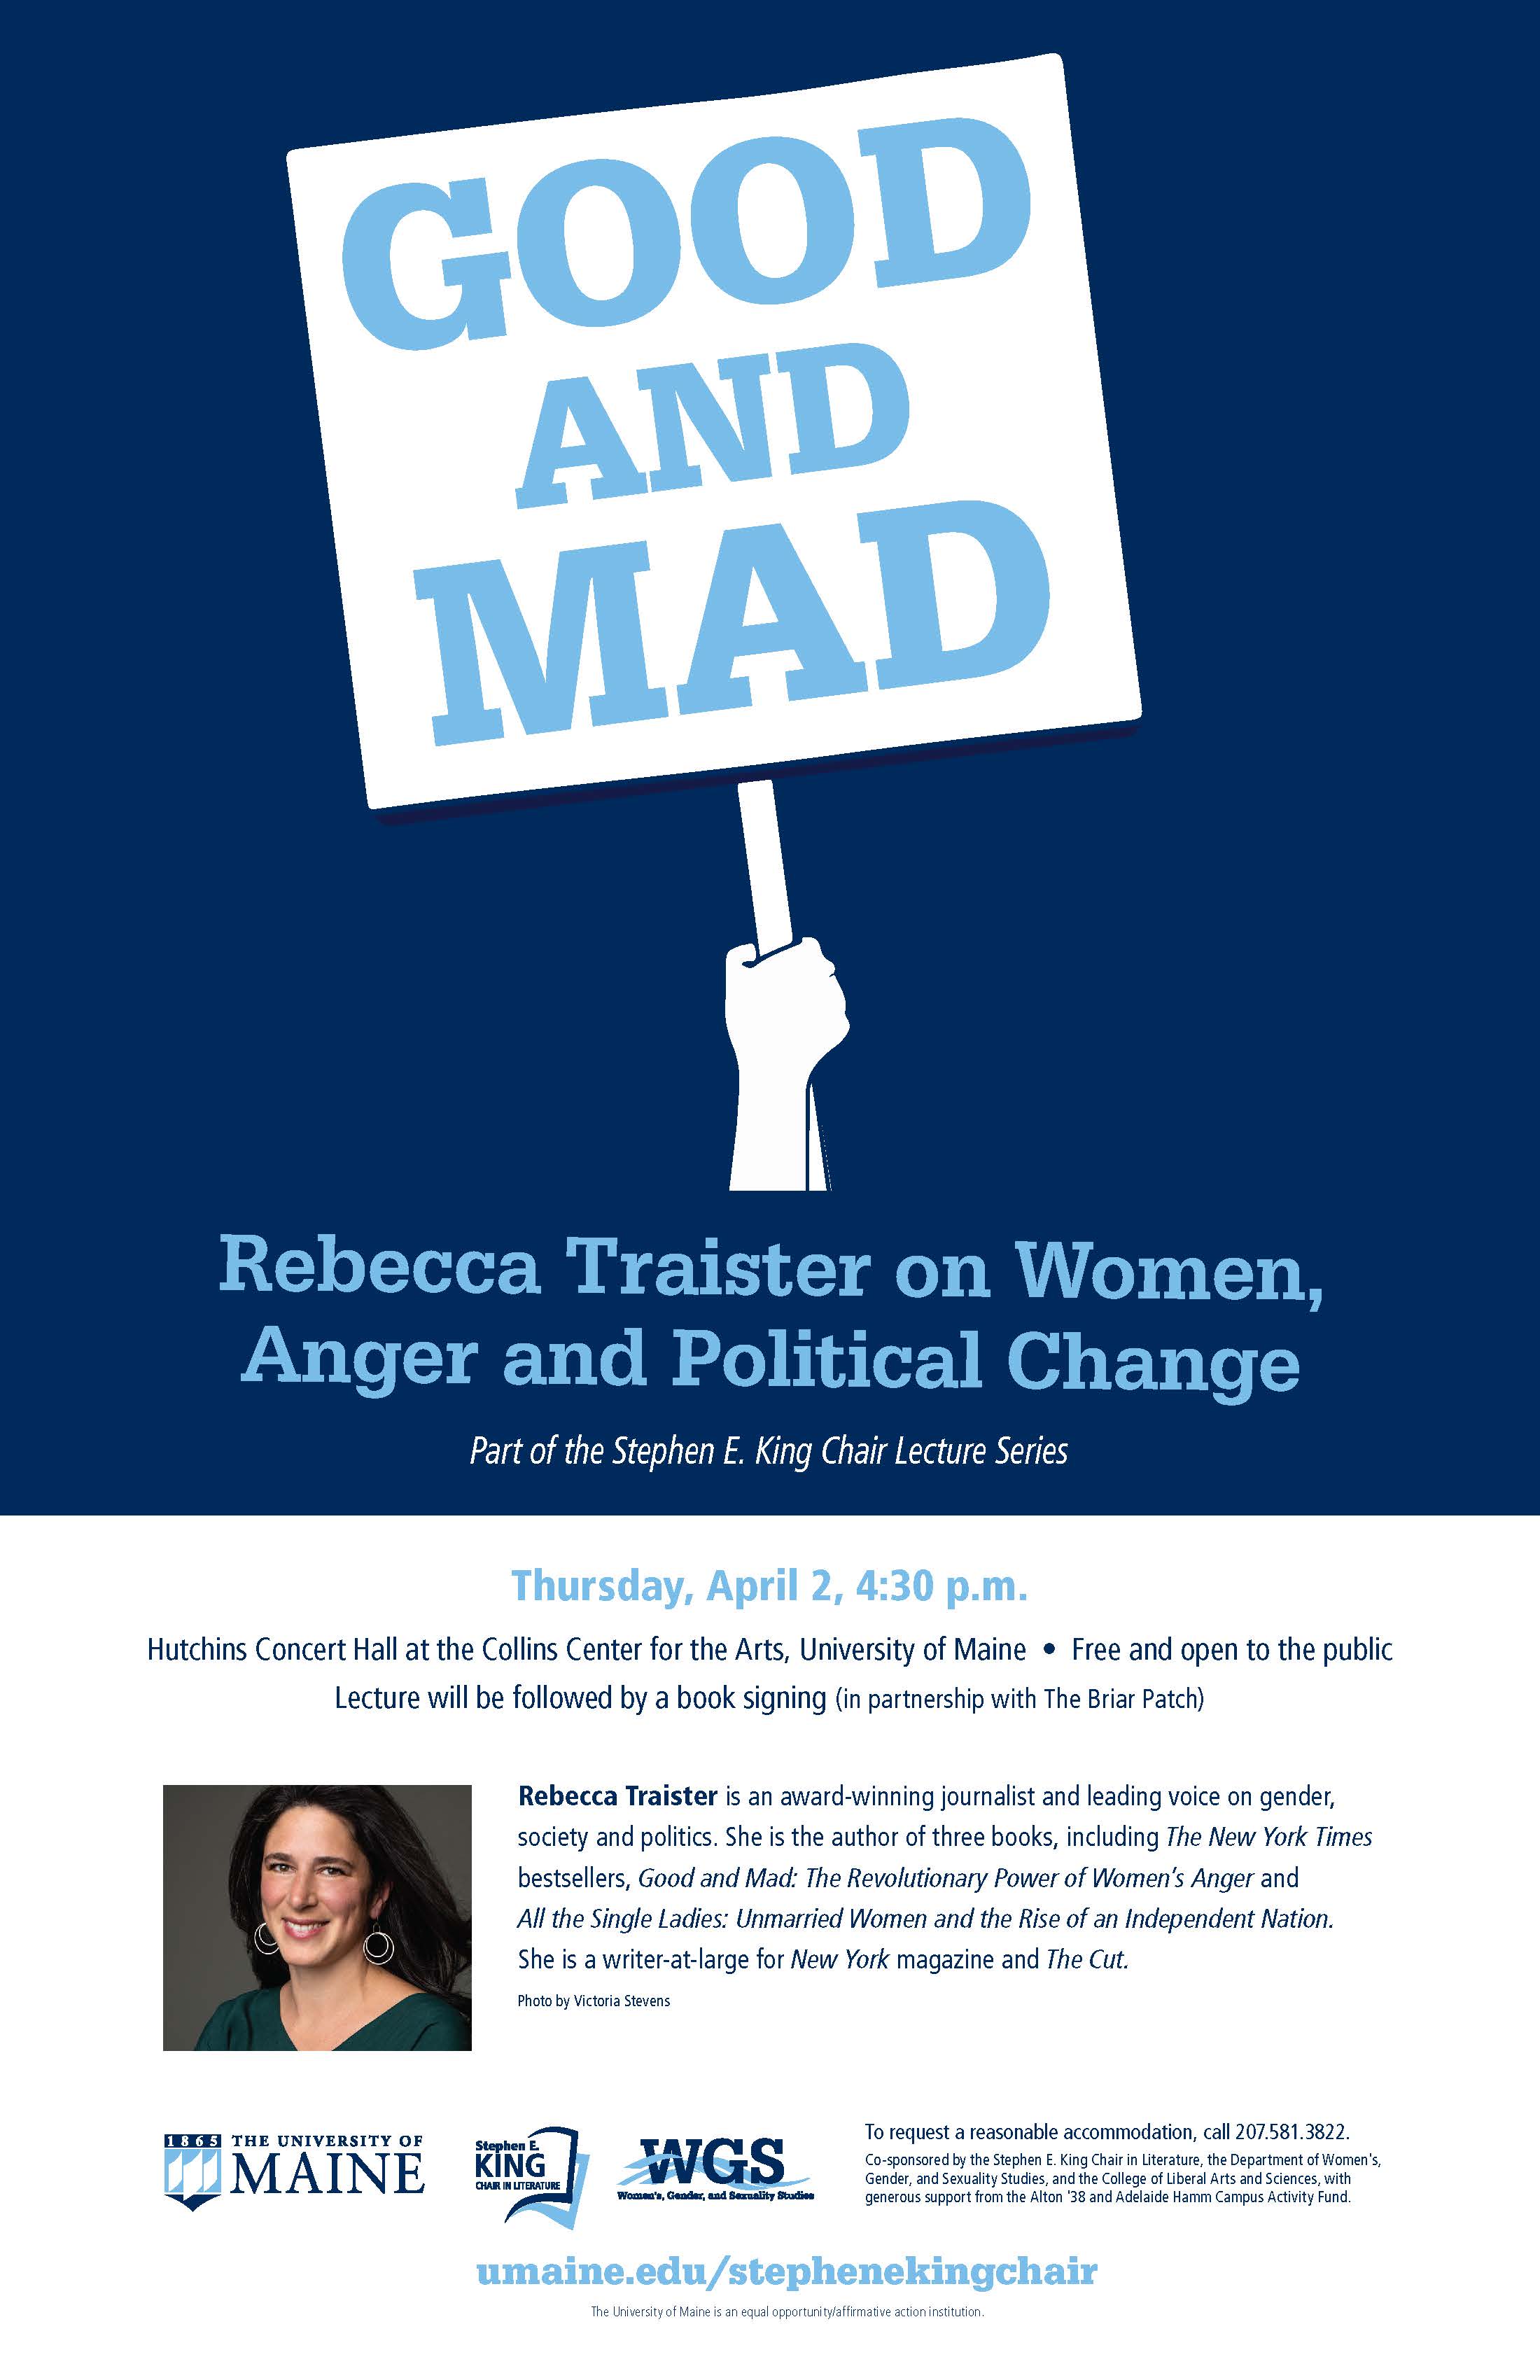 Poster Promoting April 2nd talk by Rebecca Traister